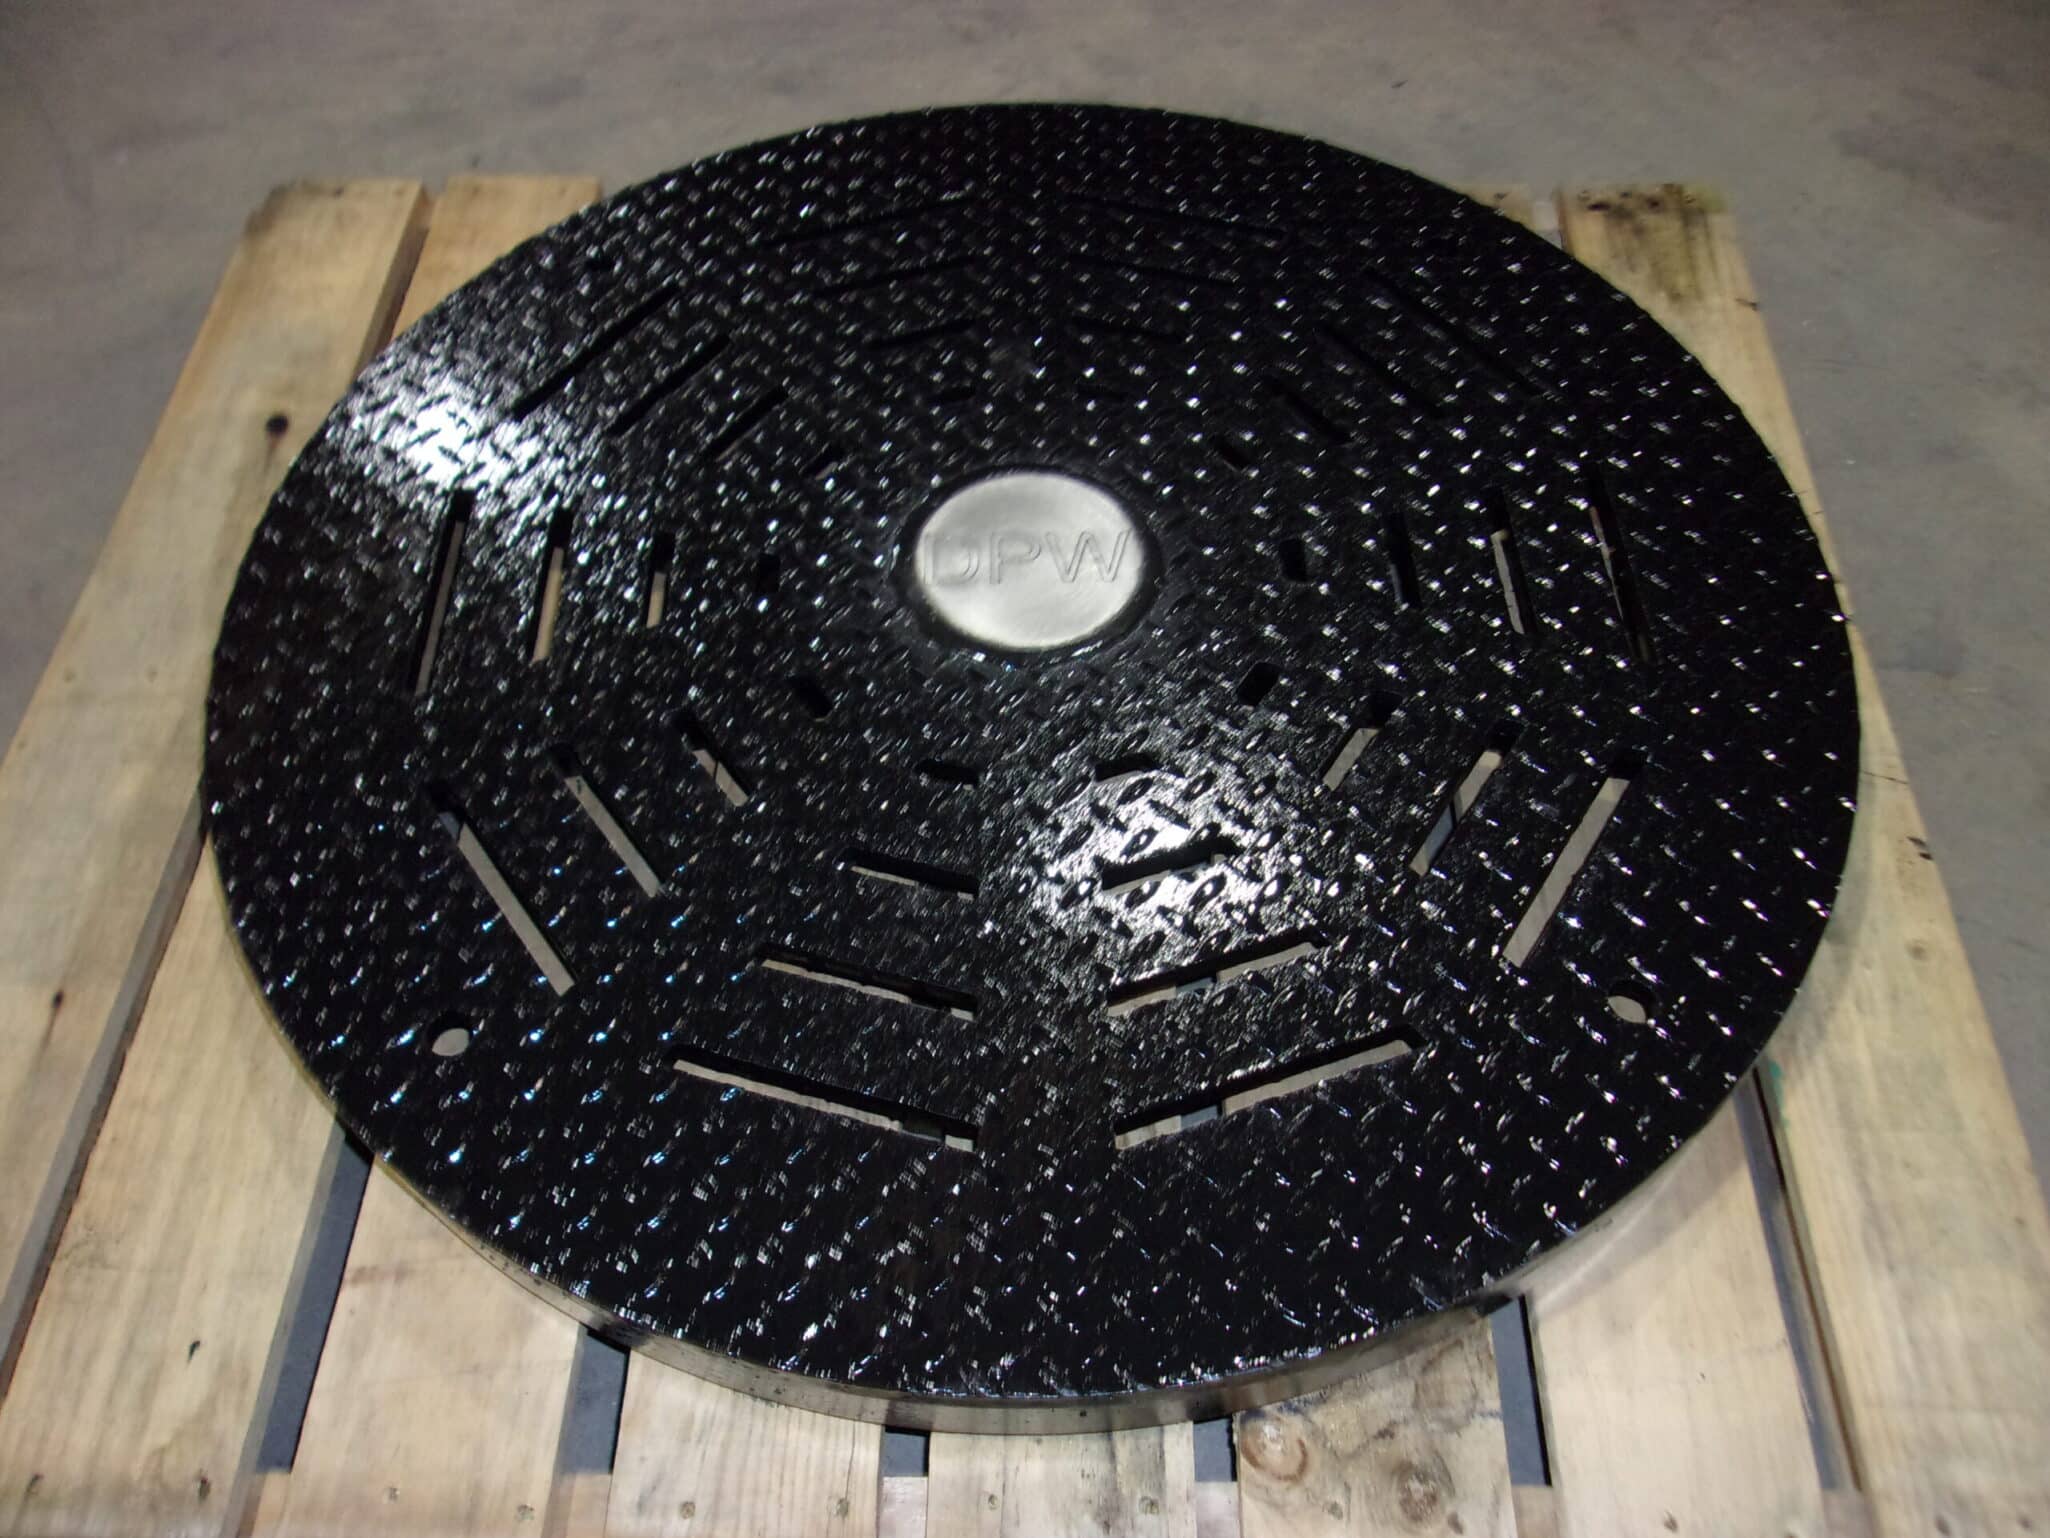 ROUND DRAIN COVER WITH DPW ID TAG